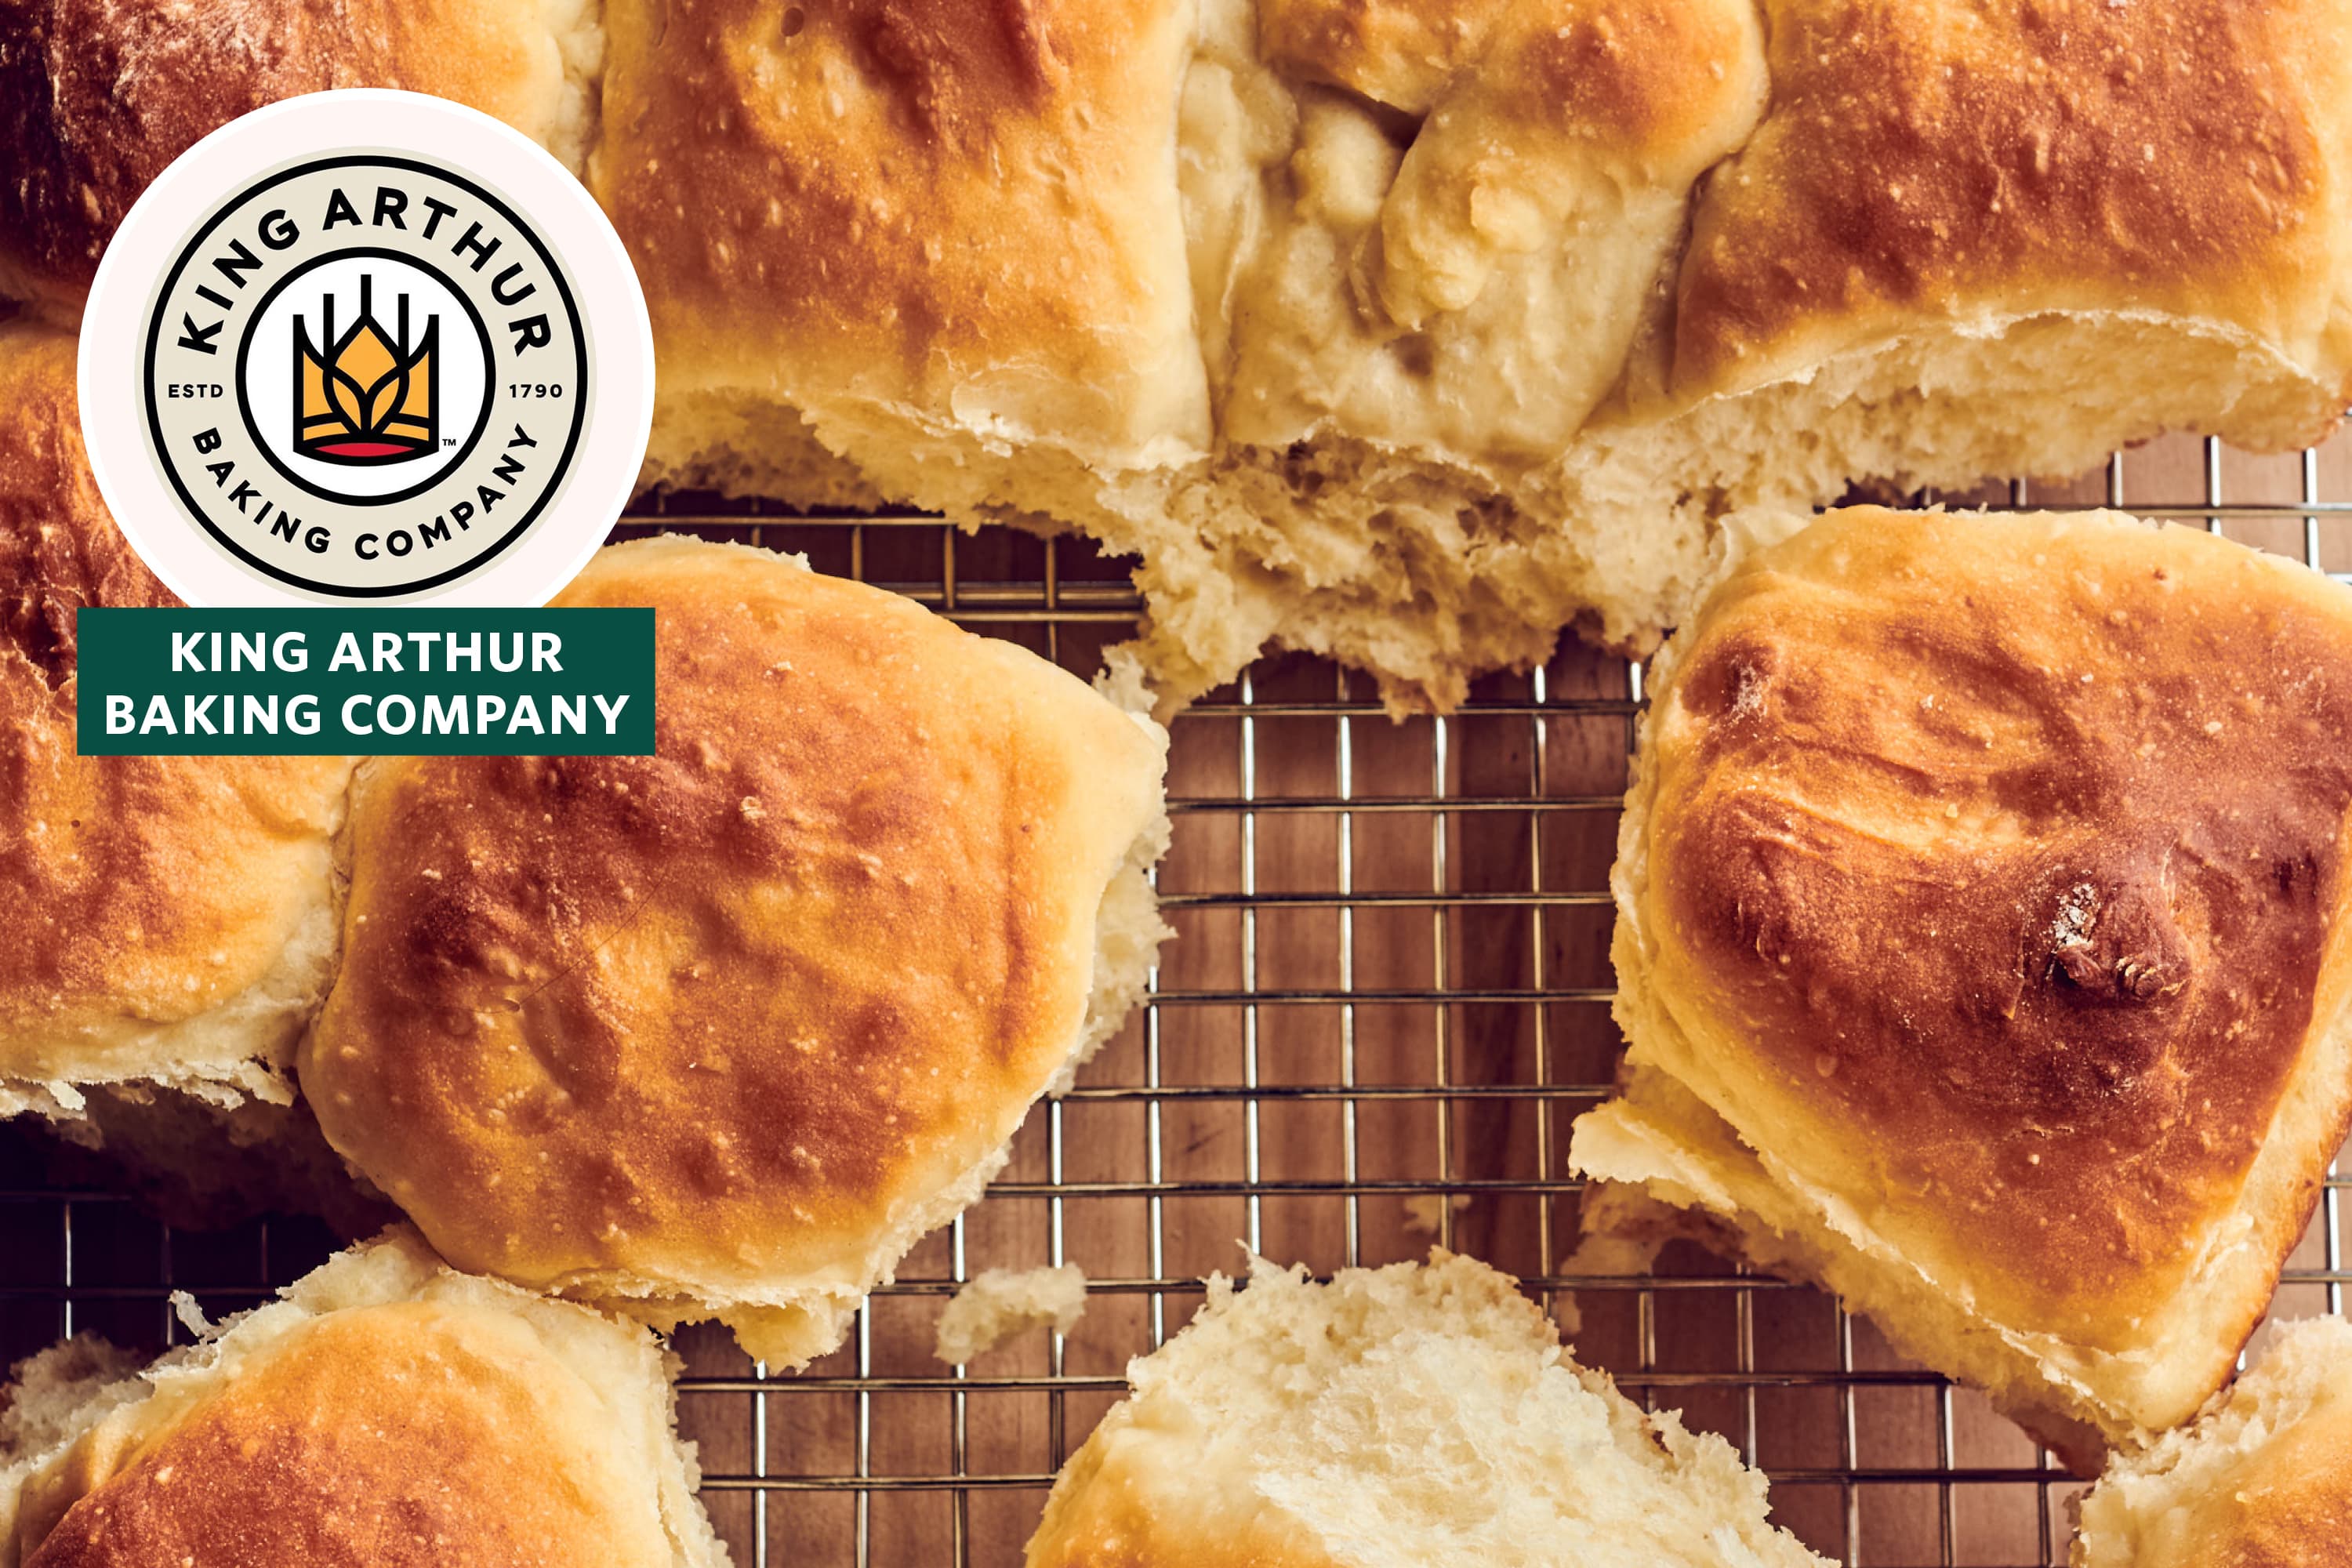 King Arthur Baking Company - Turn any cake into a snack cake by utilizing  our Mini Scone Pan in a way you may not expect. Let us know which cakes  you'll be